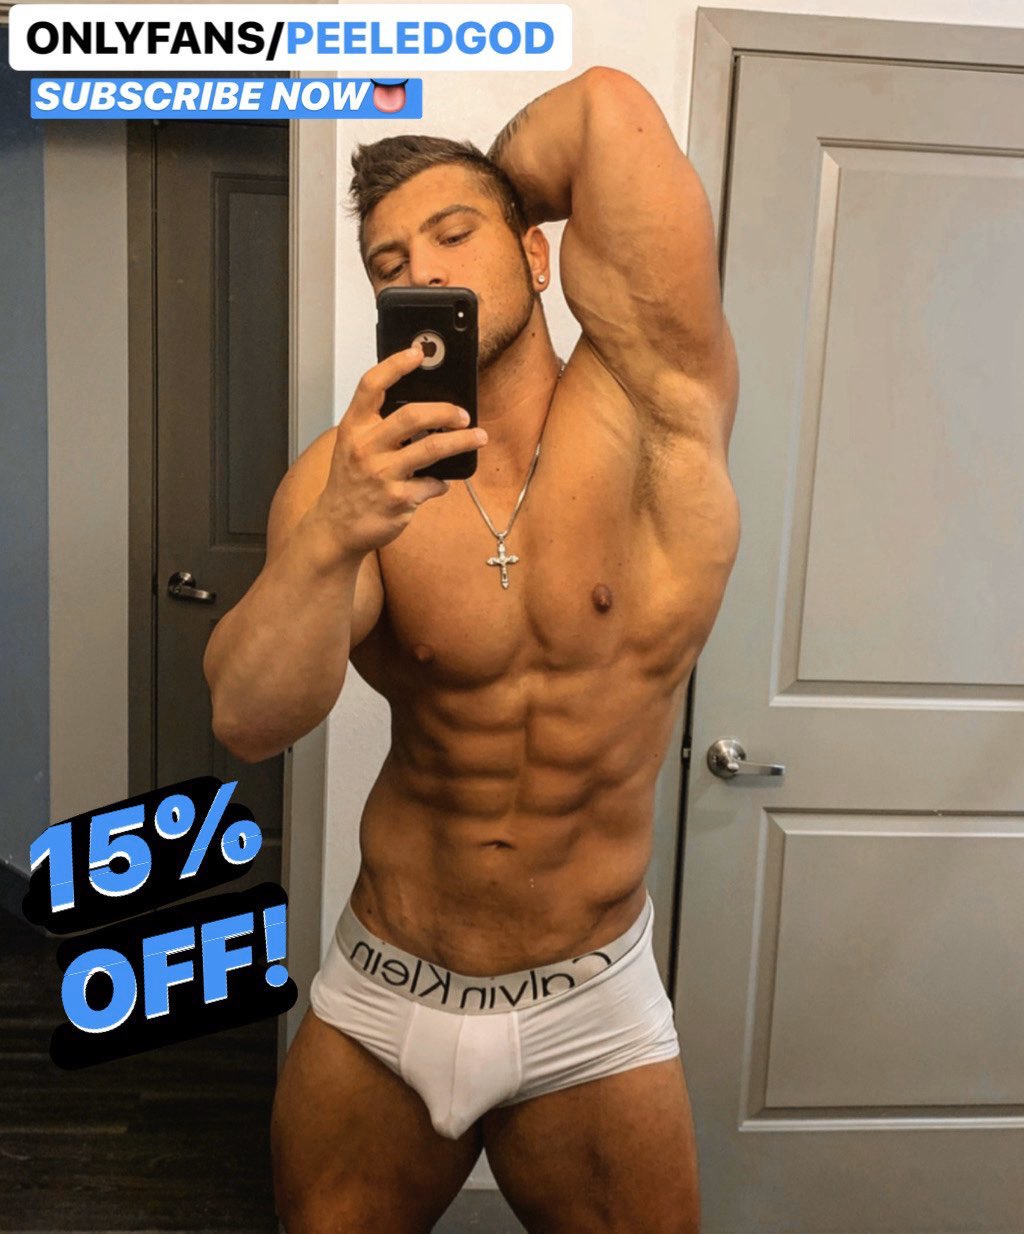 Nick ray onlyfans